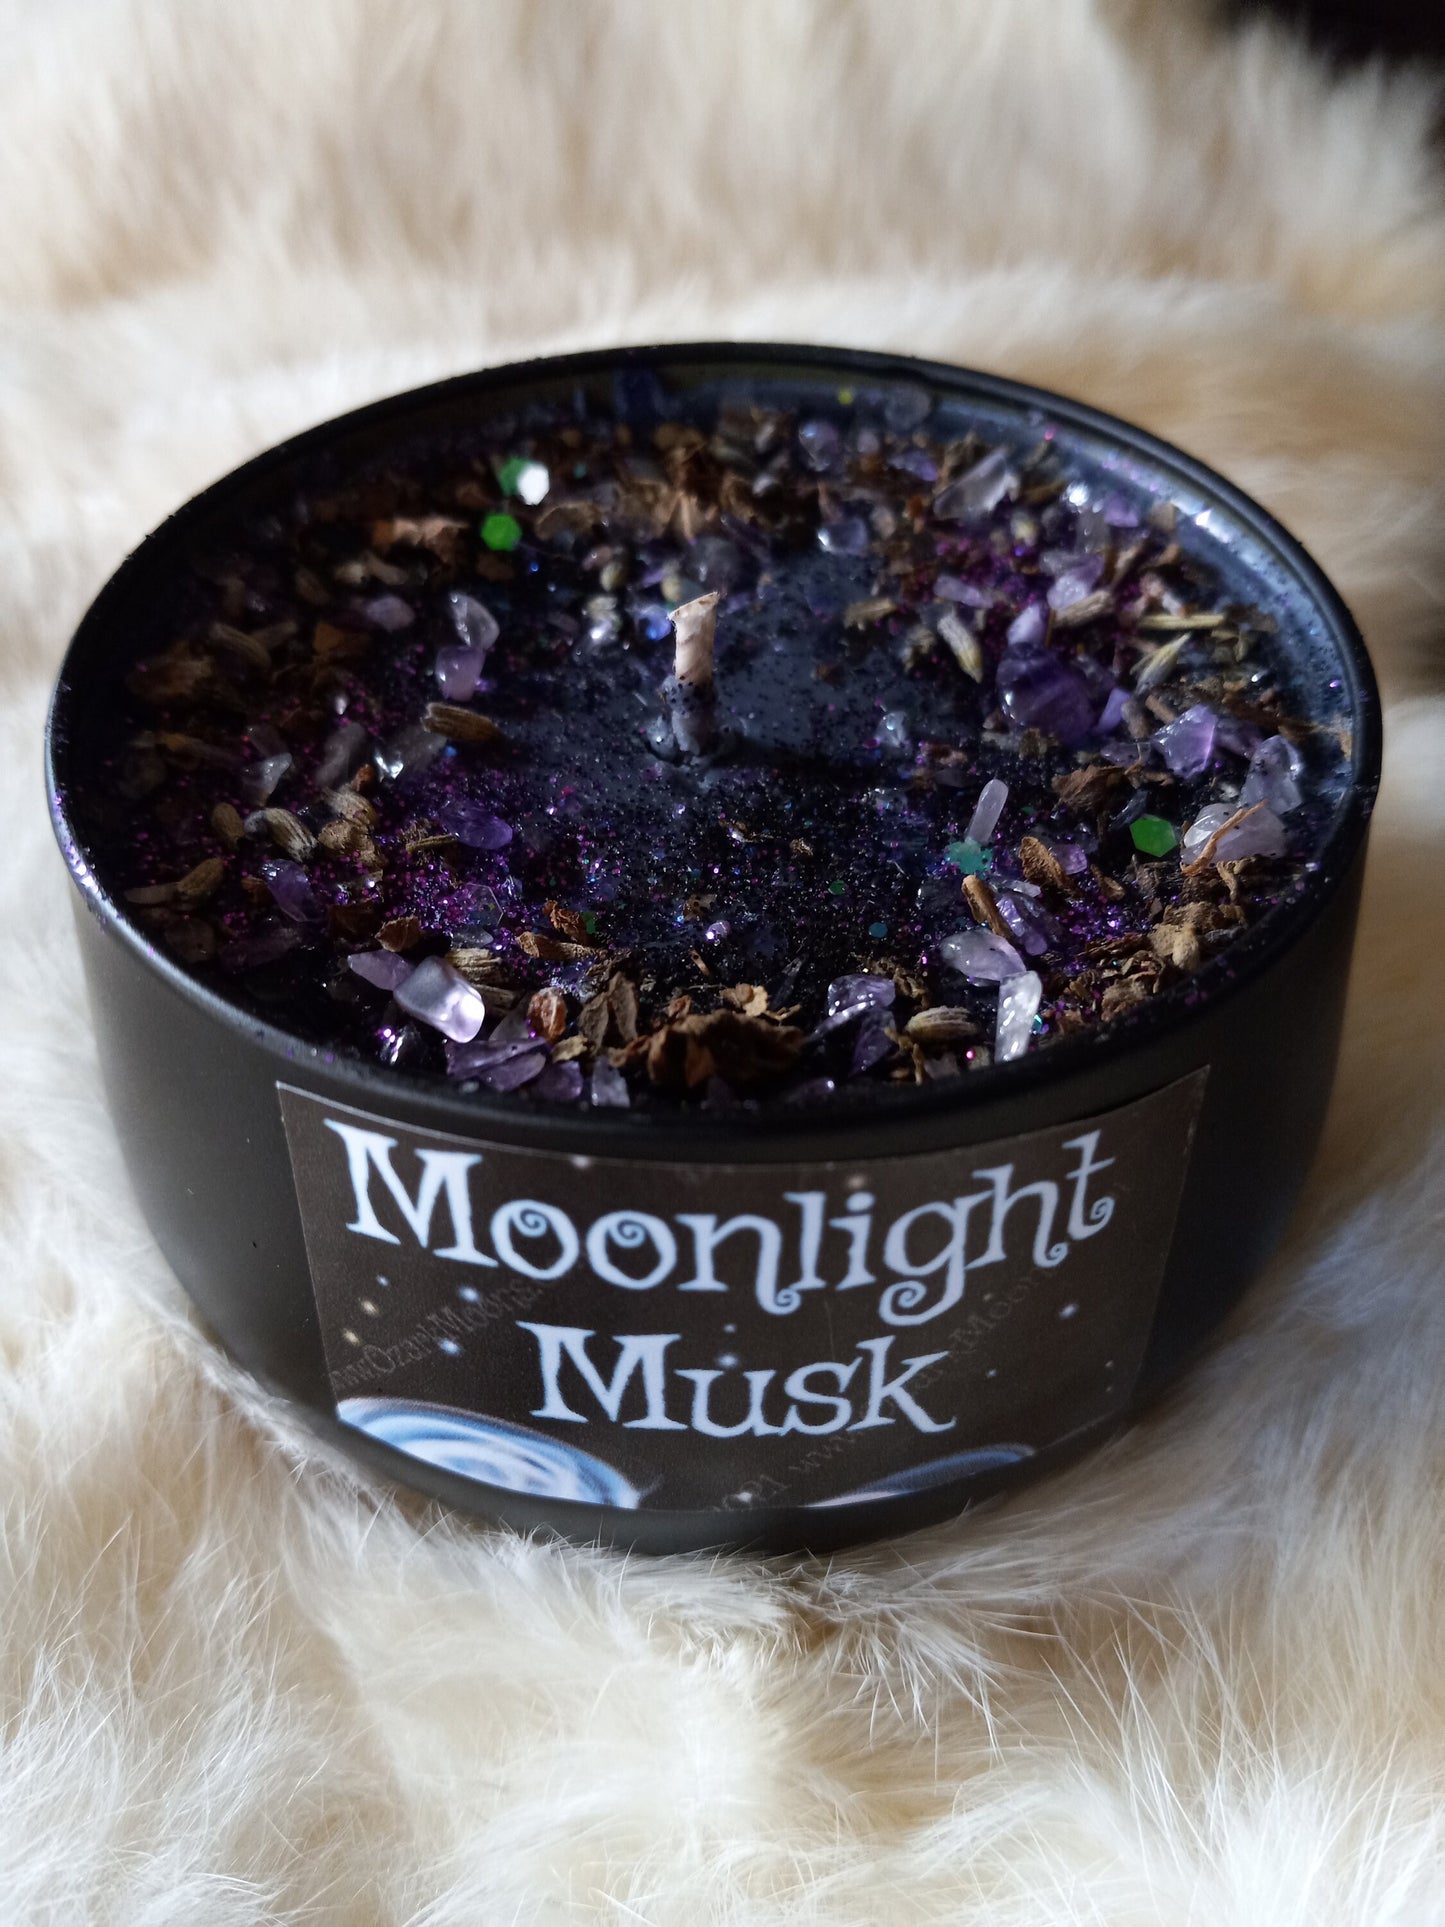 8 oz Candle Moonlight Musk - Soy Coconut Candles with Highly Scented Sensual Sexy Musk, Incense, and High-End Cologne Scent in Tin with Lid